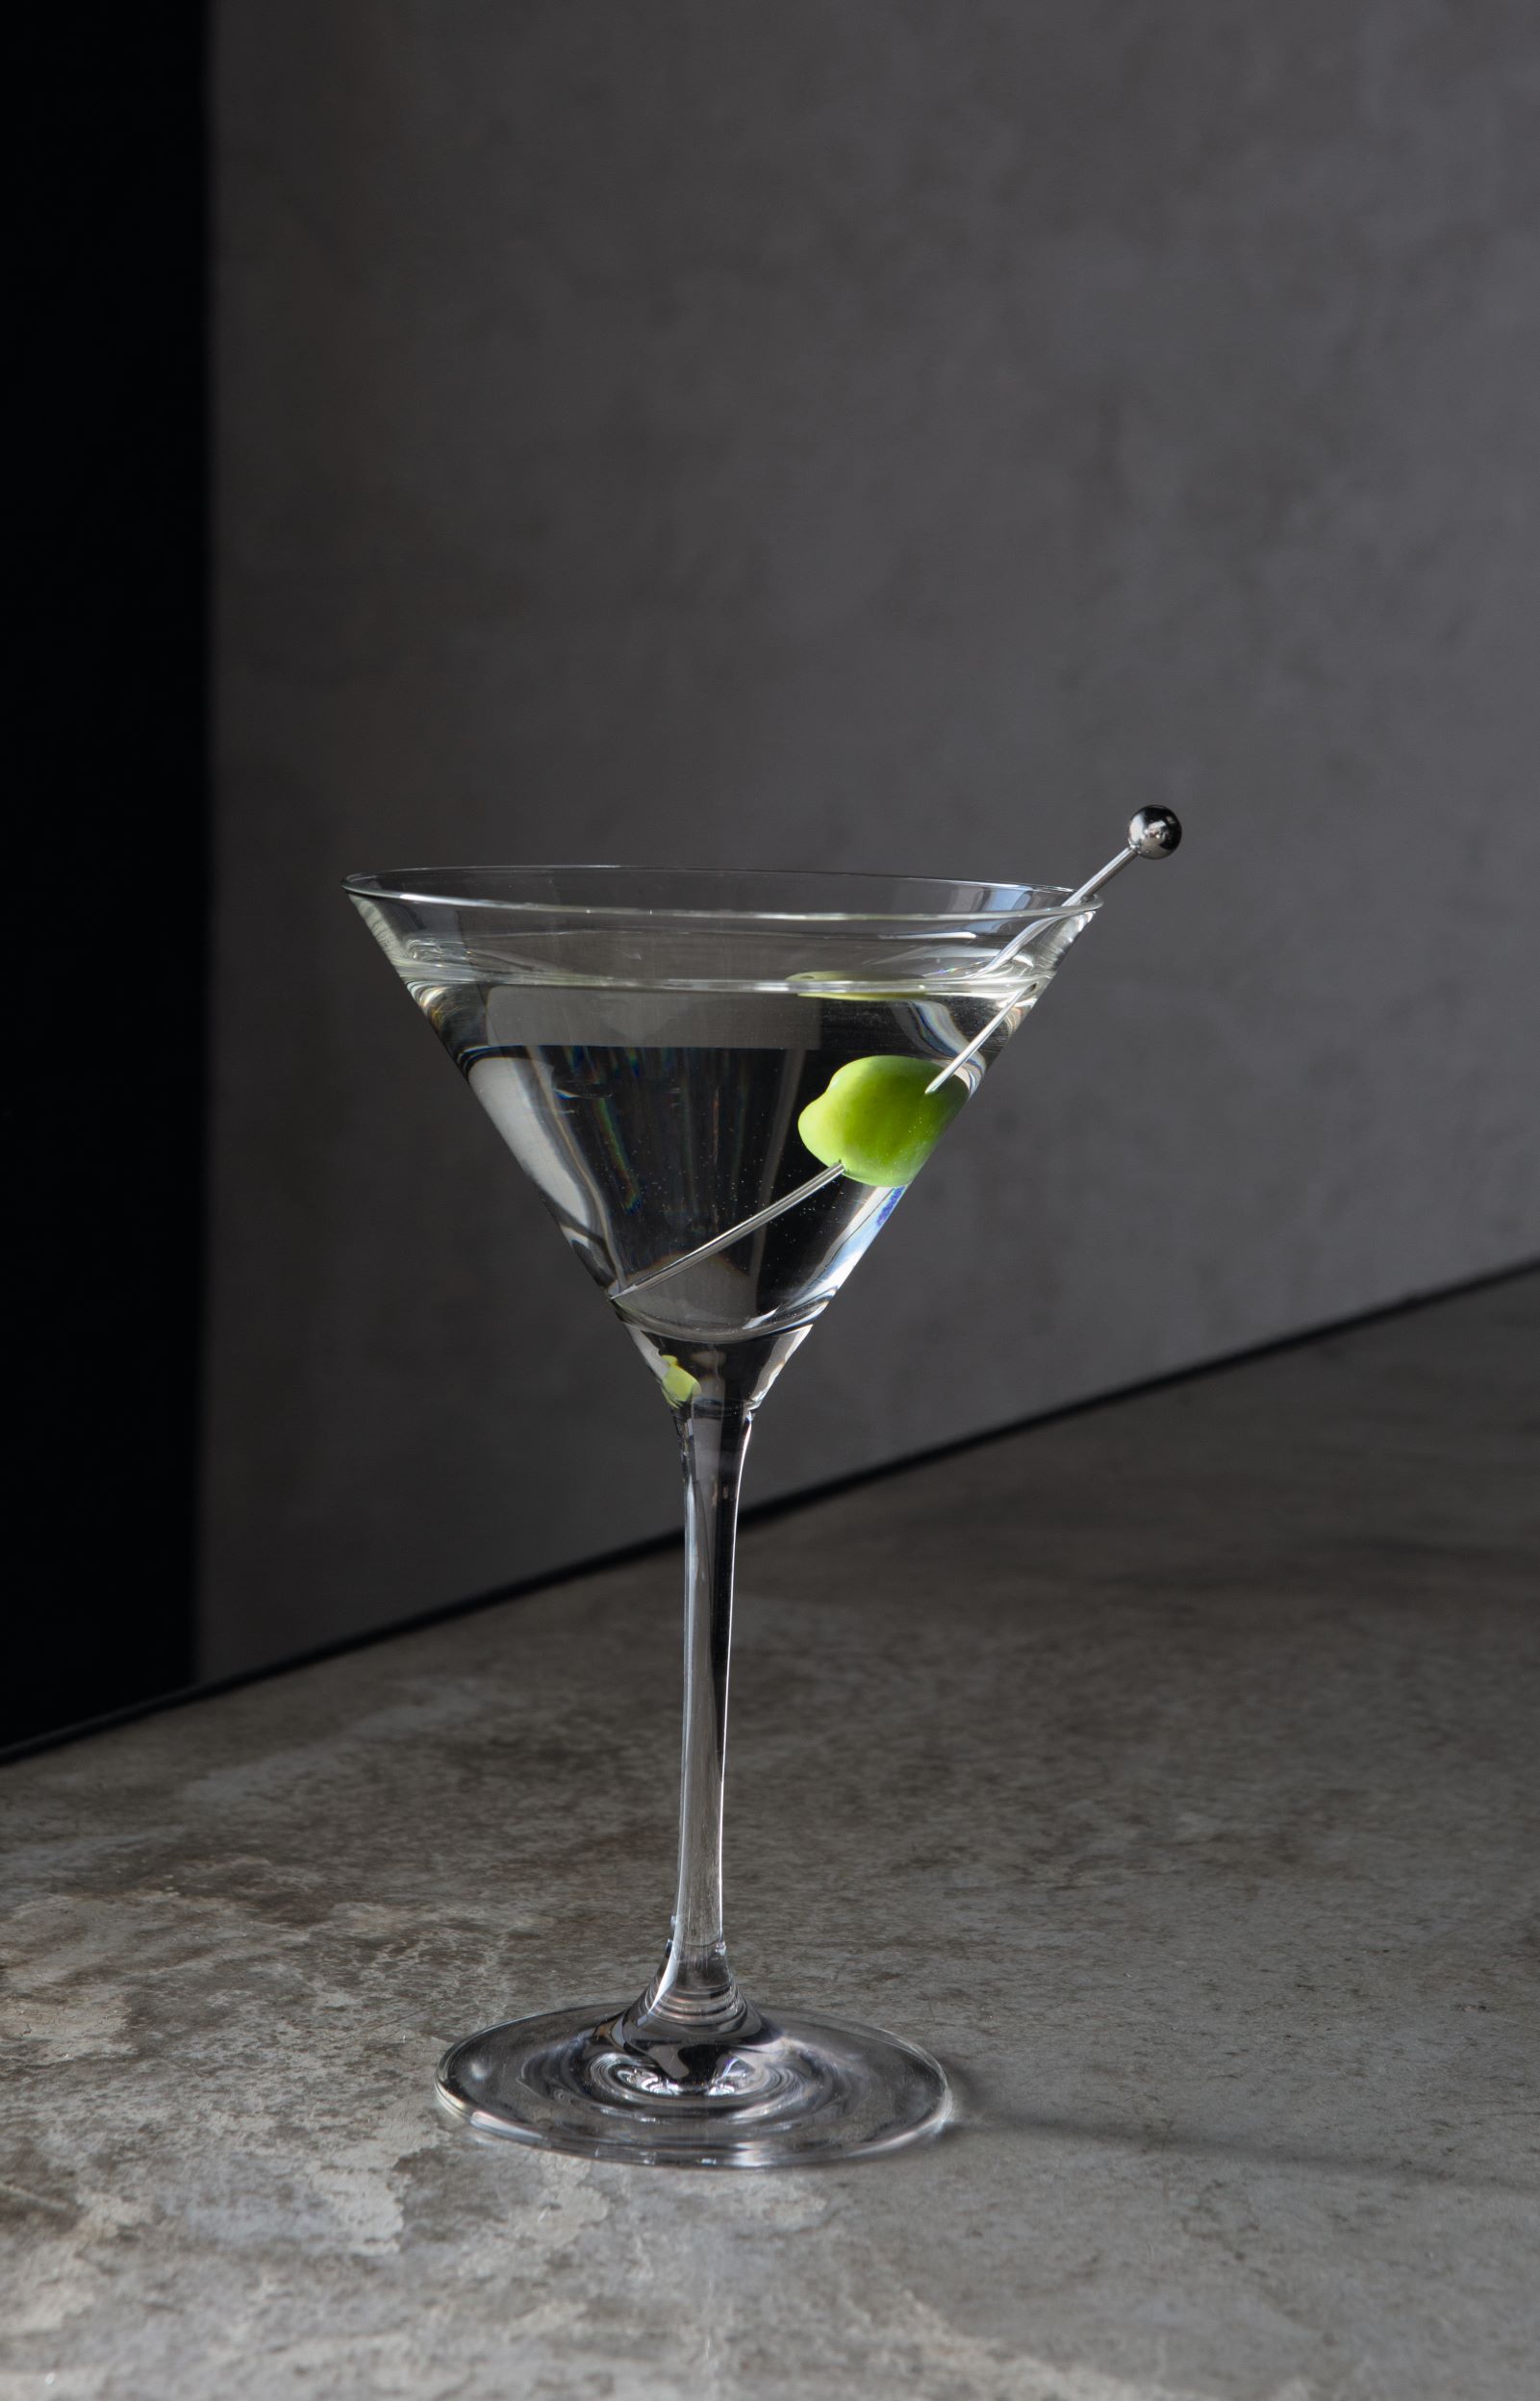 The Martini. All images from Spirited